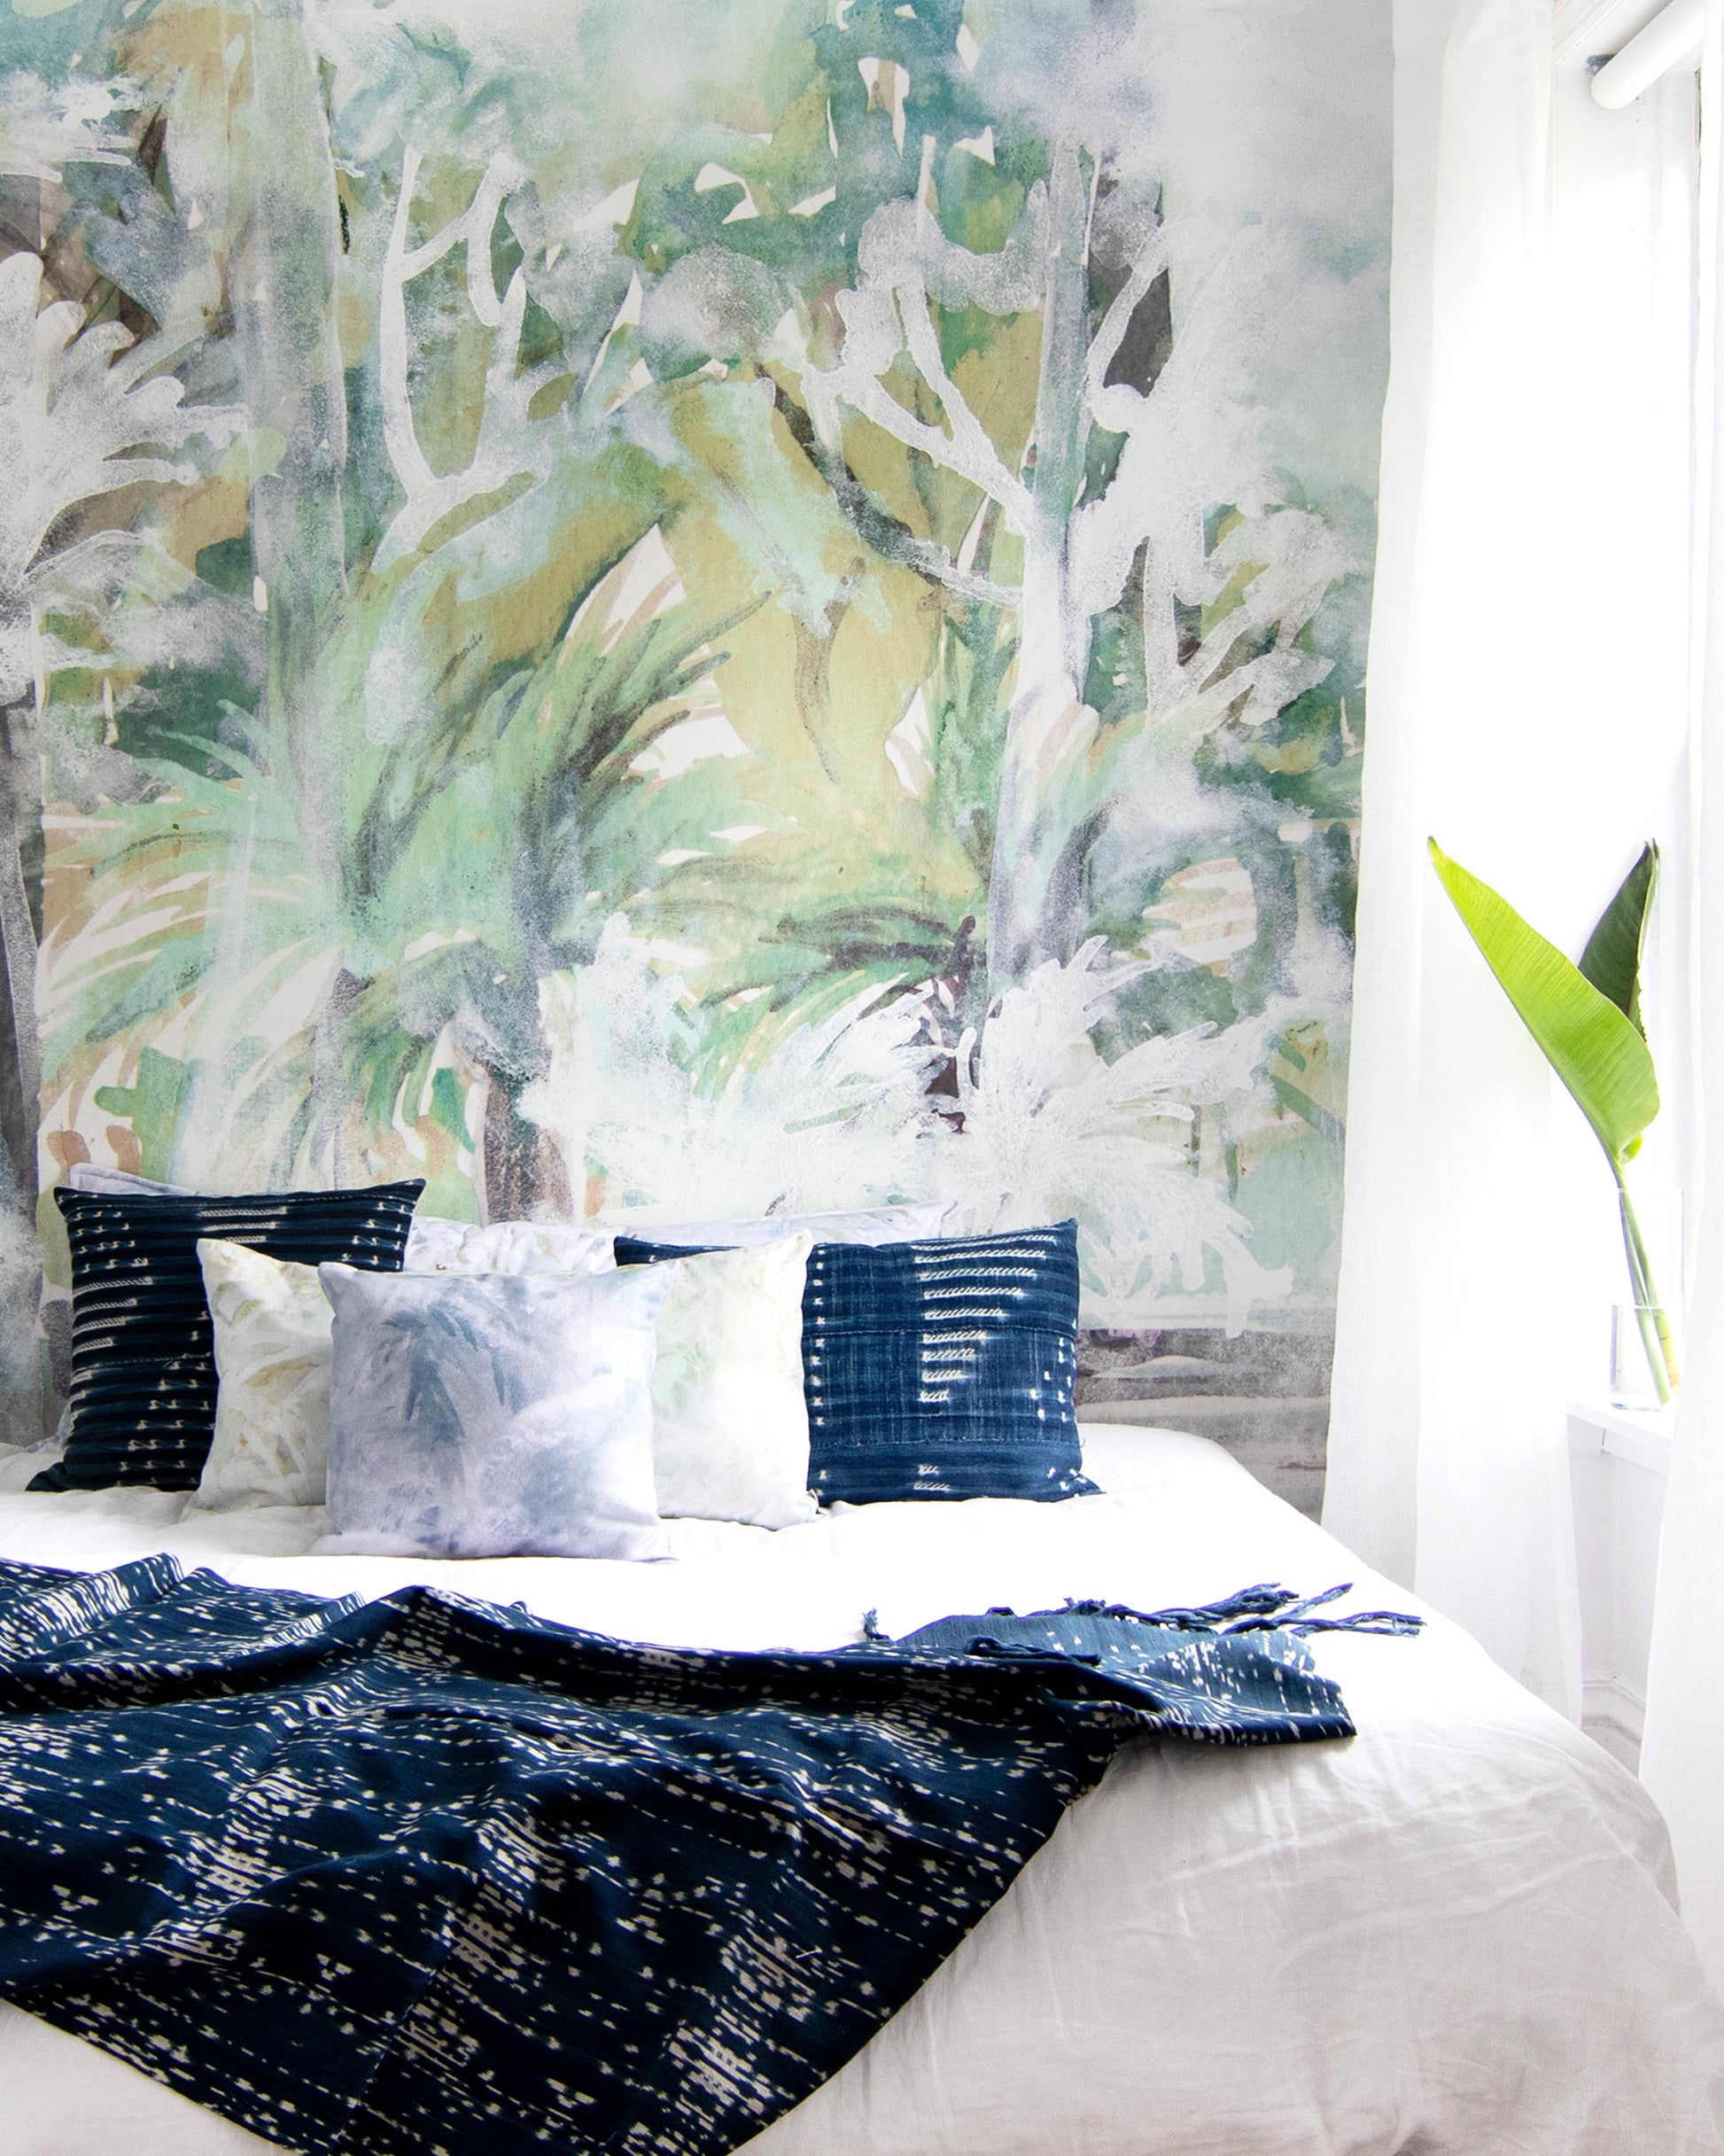 A bedroom with a large mural, Regalo di Dio Wallpaper Mural Verde, on the wall.